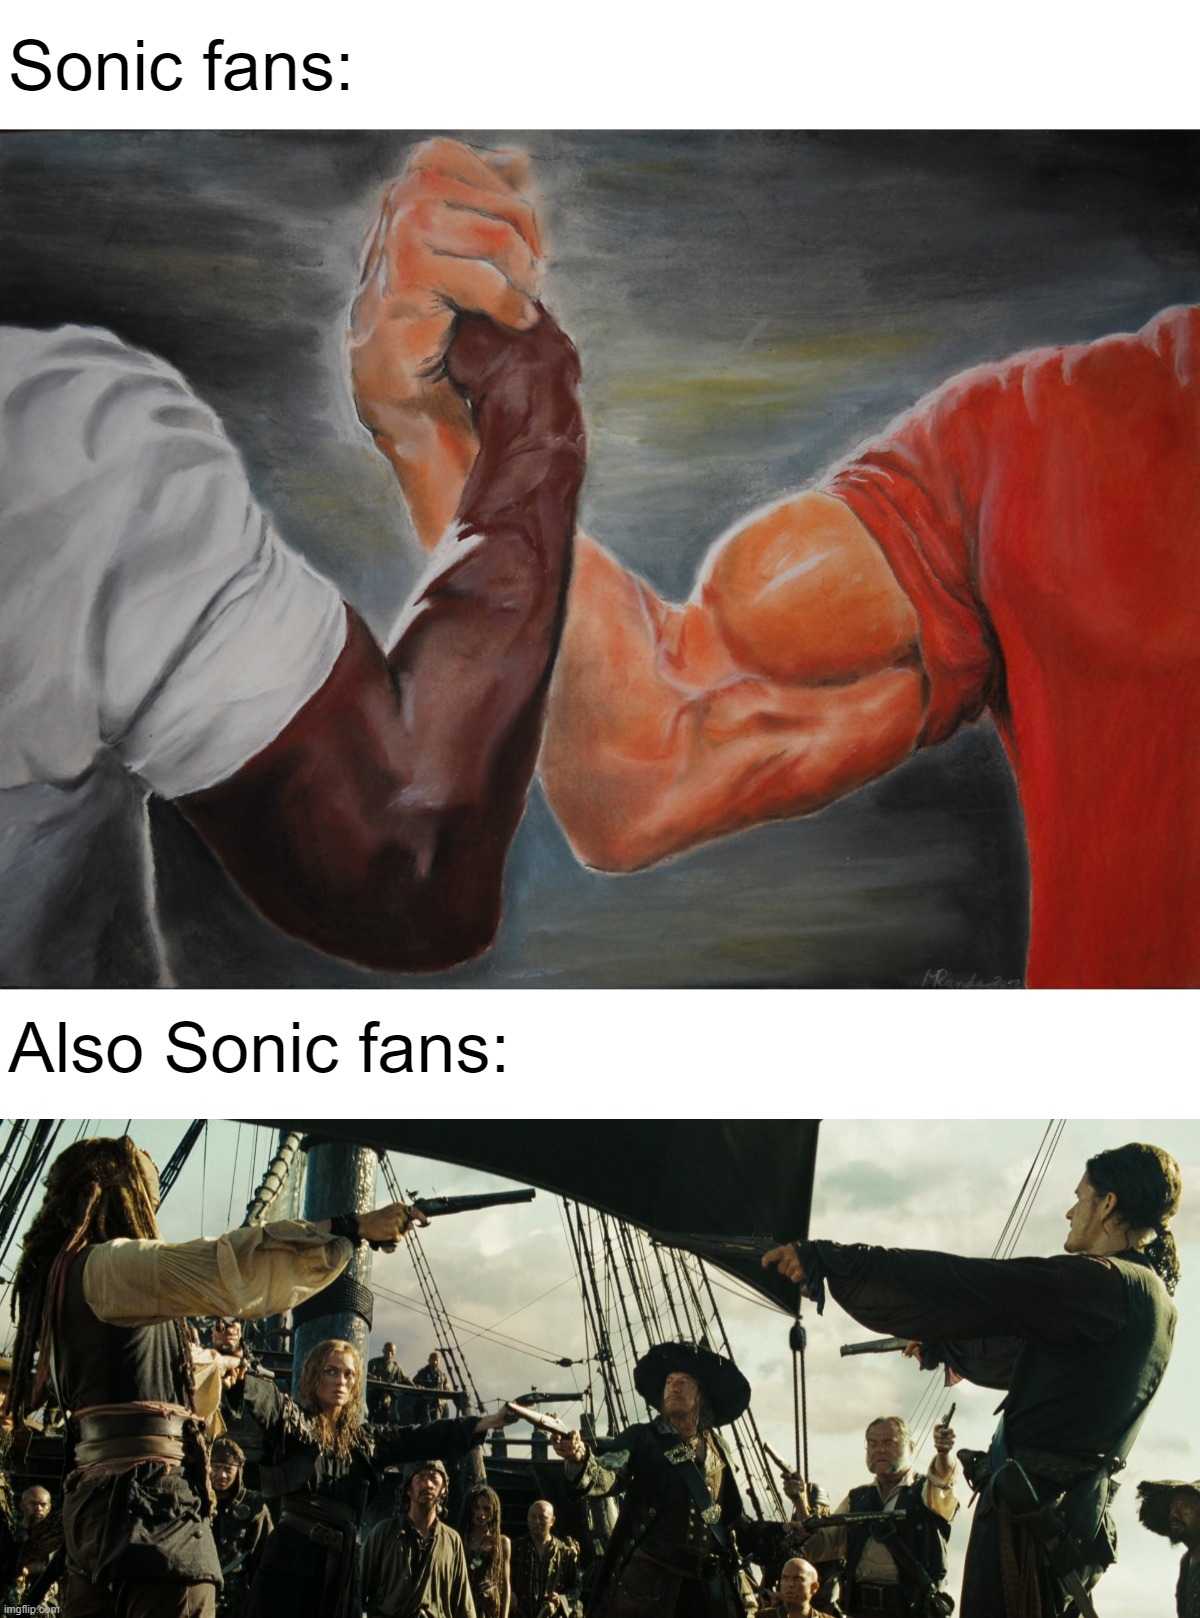  Sonic fans:; Also Sonic fans: | image tagged in memes,epic handshake | made w/ Imgflip meme maker